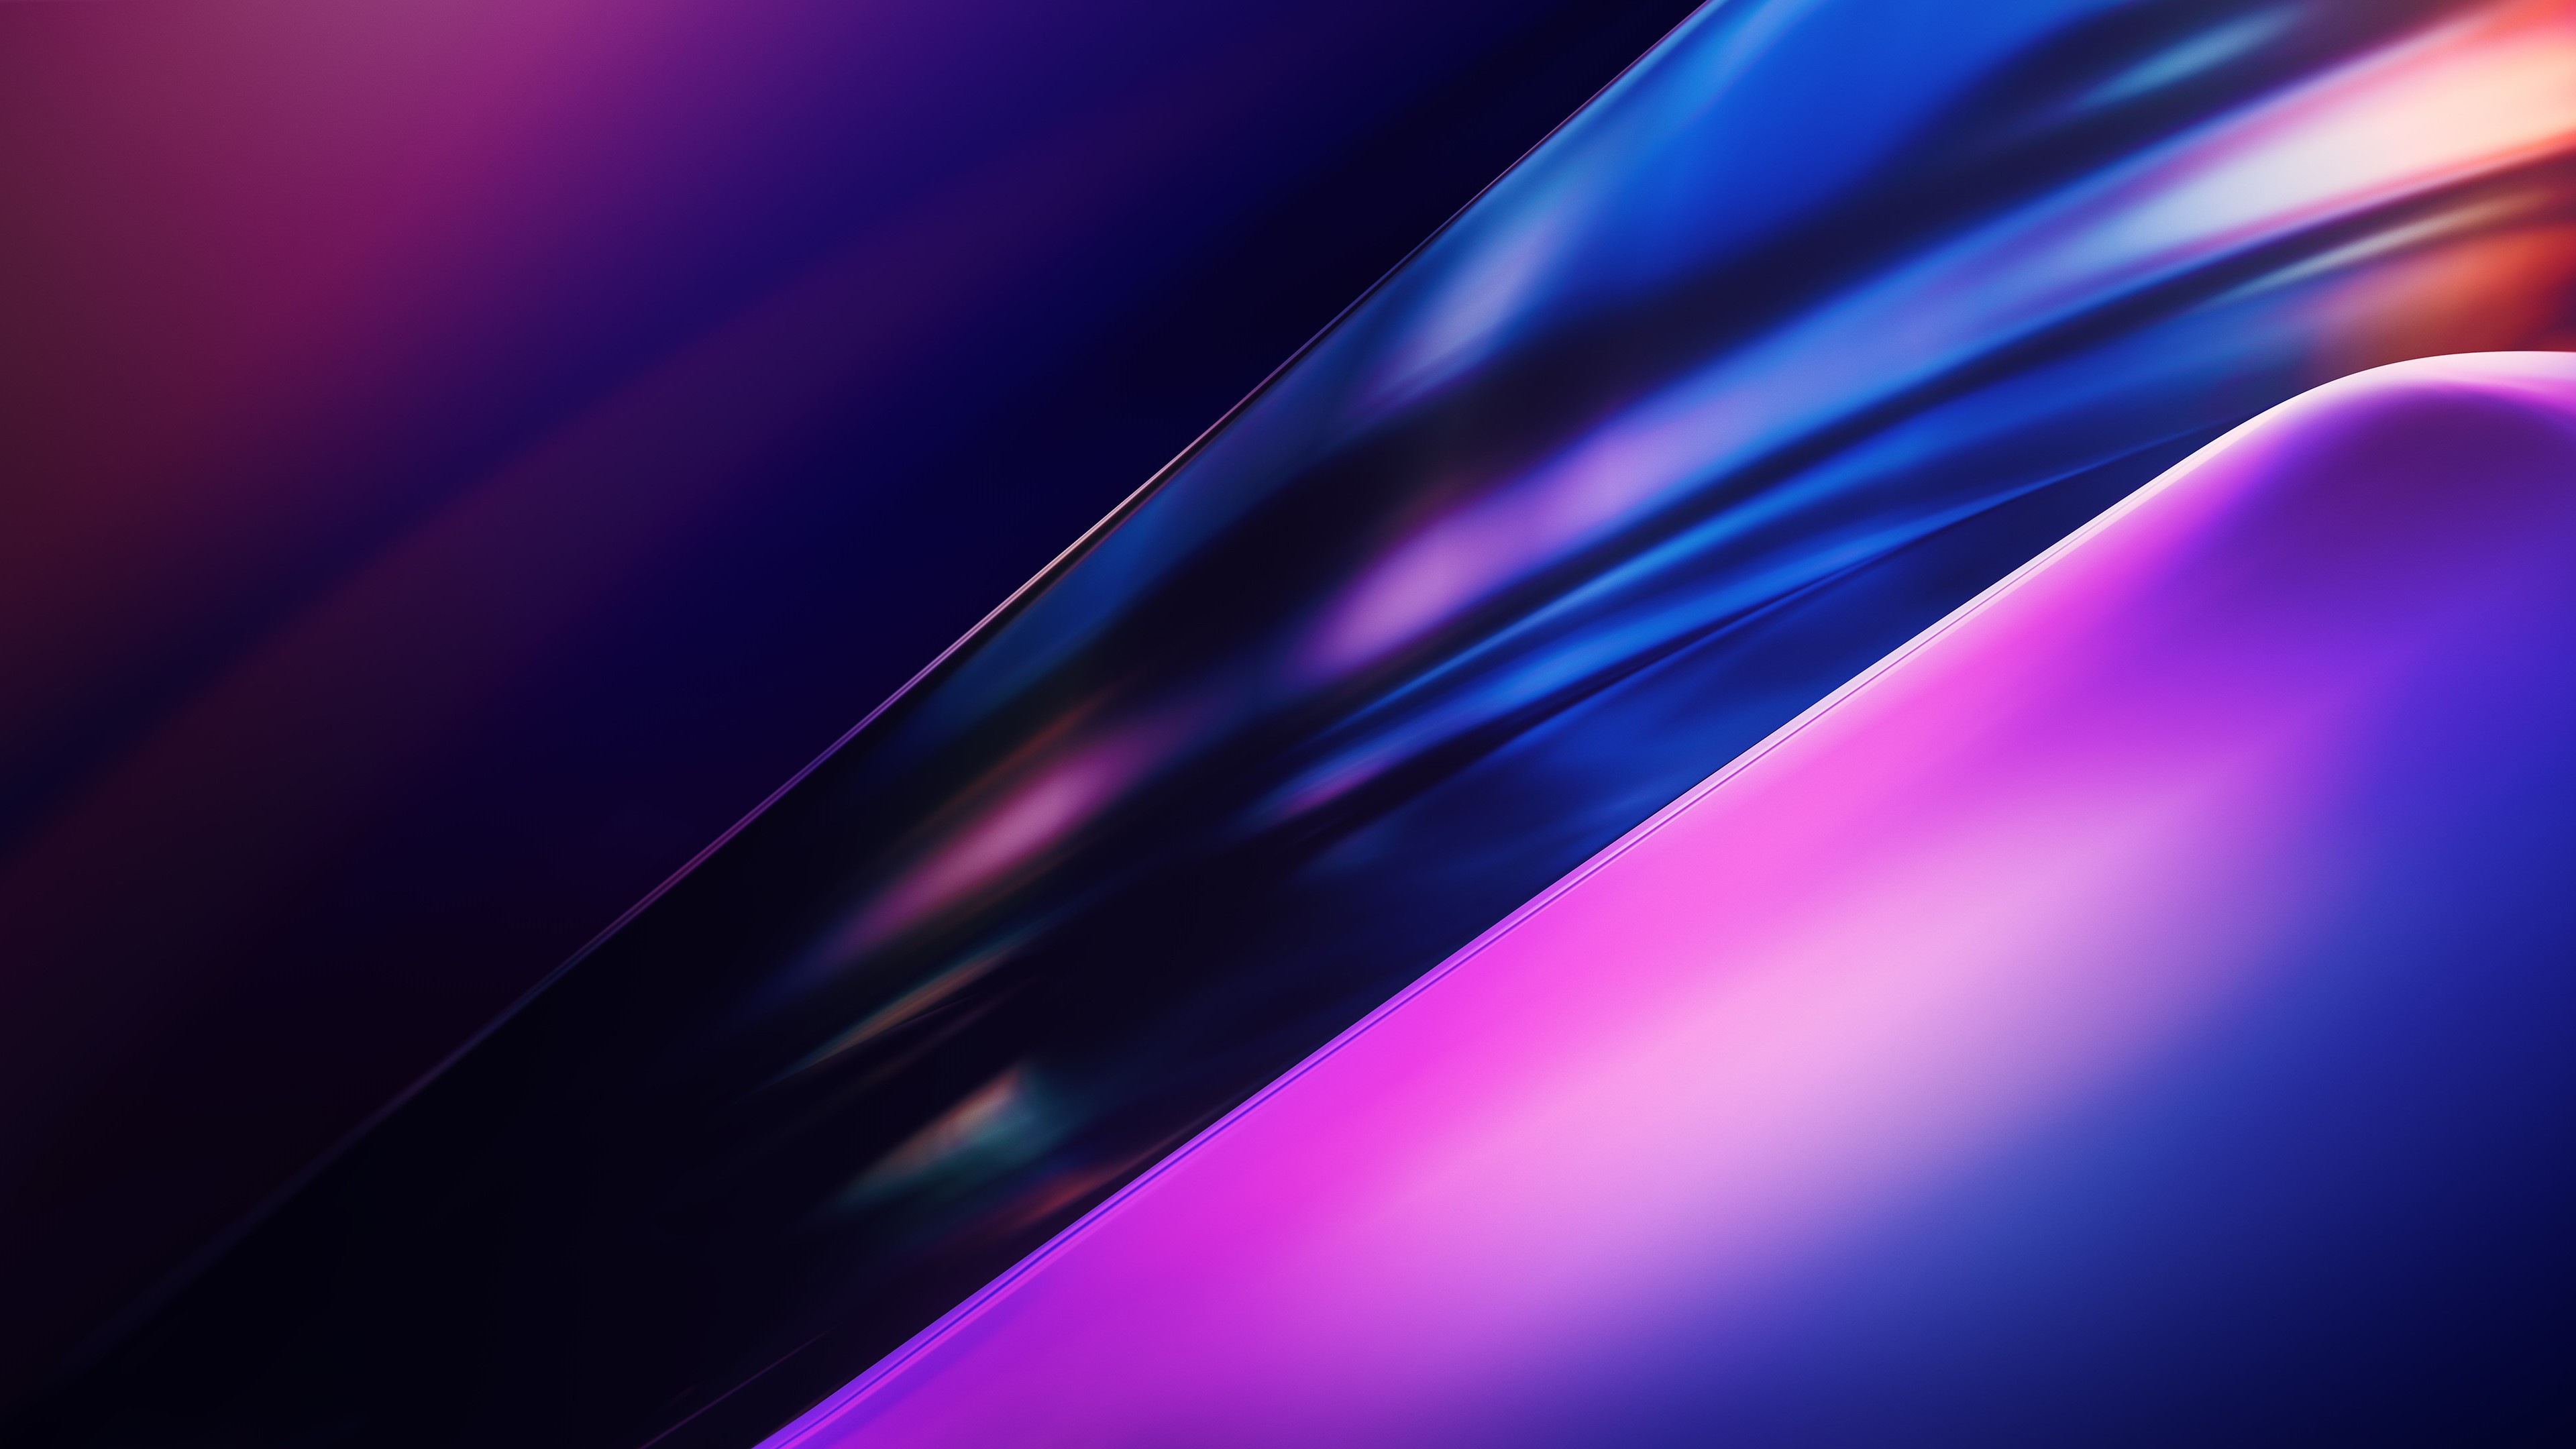 Wallpaper oneplus t abstract colorful k os